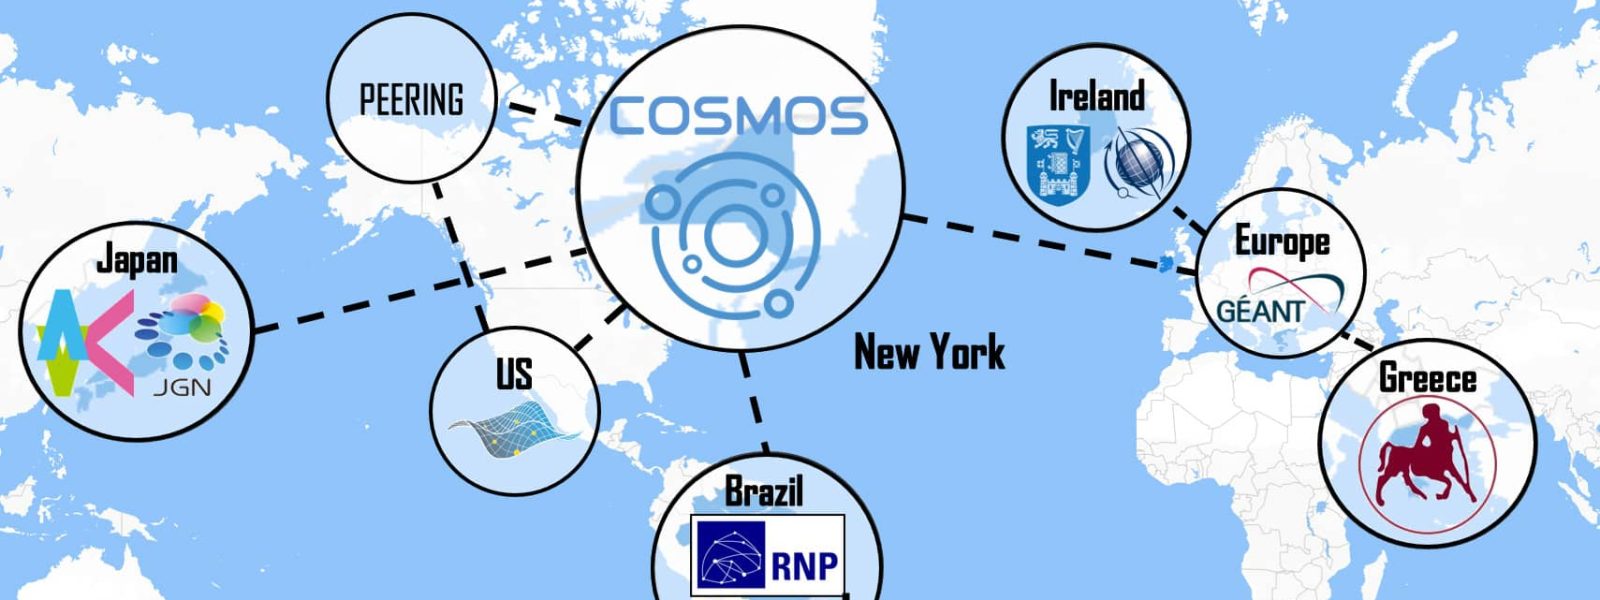 COSMOS Interconnecting Continents (COSM-IC)